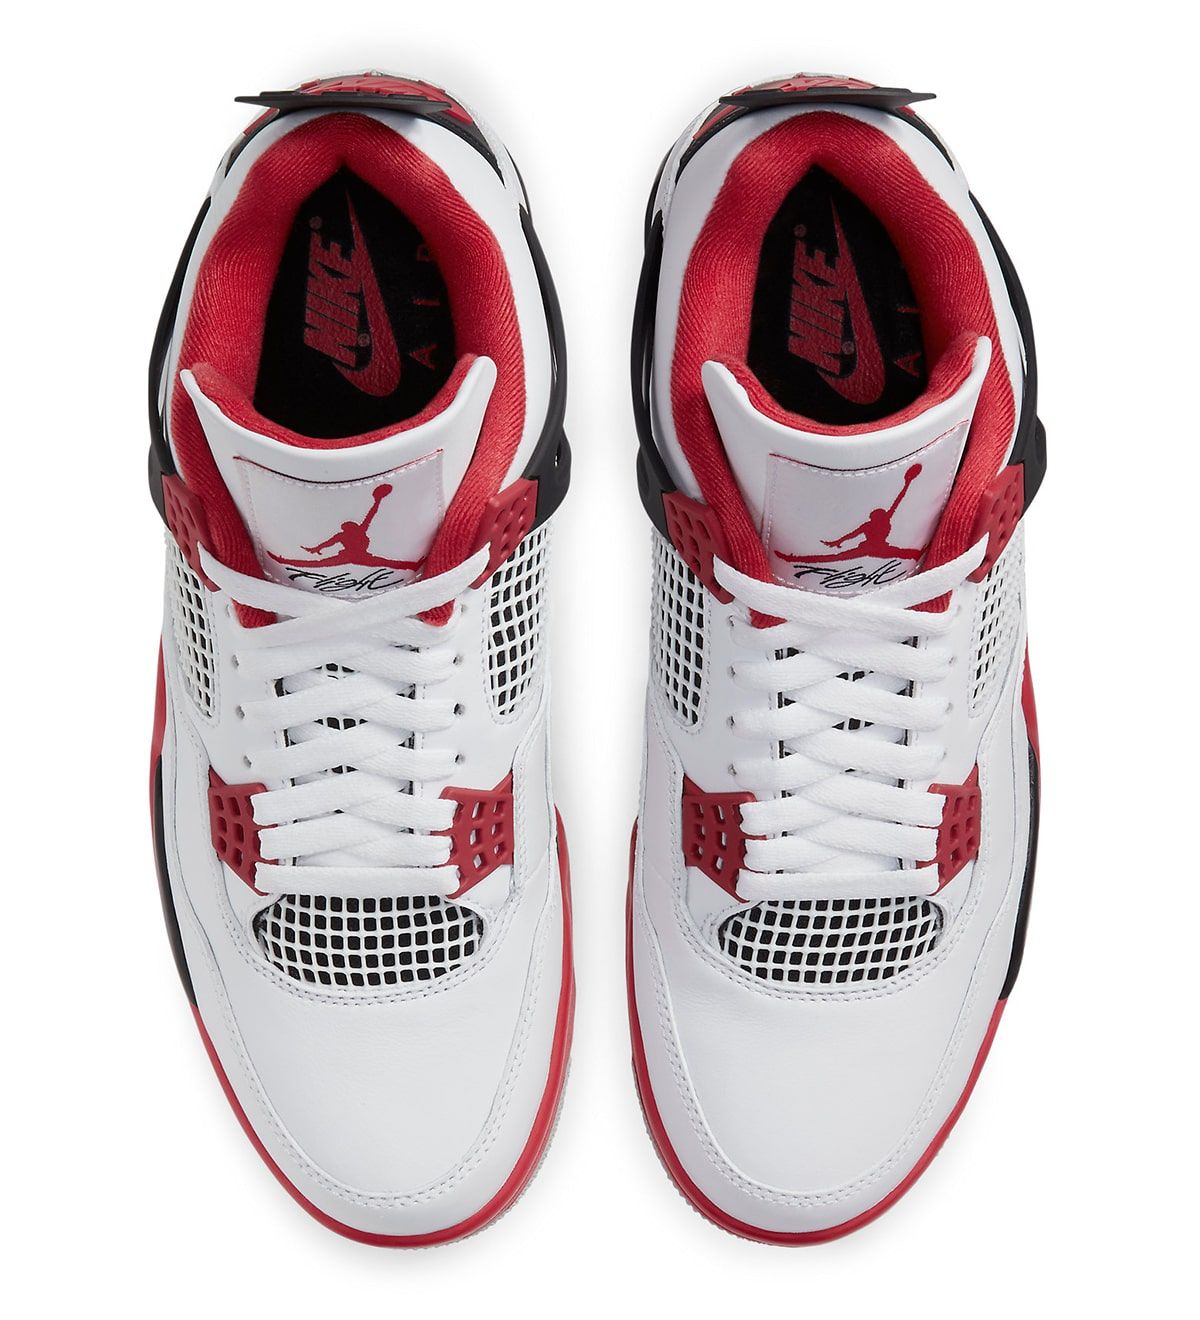 fish erotic Conceit Where to Buy the Air Jordan 4 "Fire Red" OG | HOUSE OF HEAT